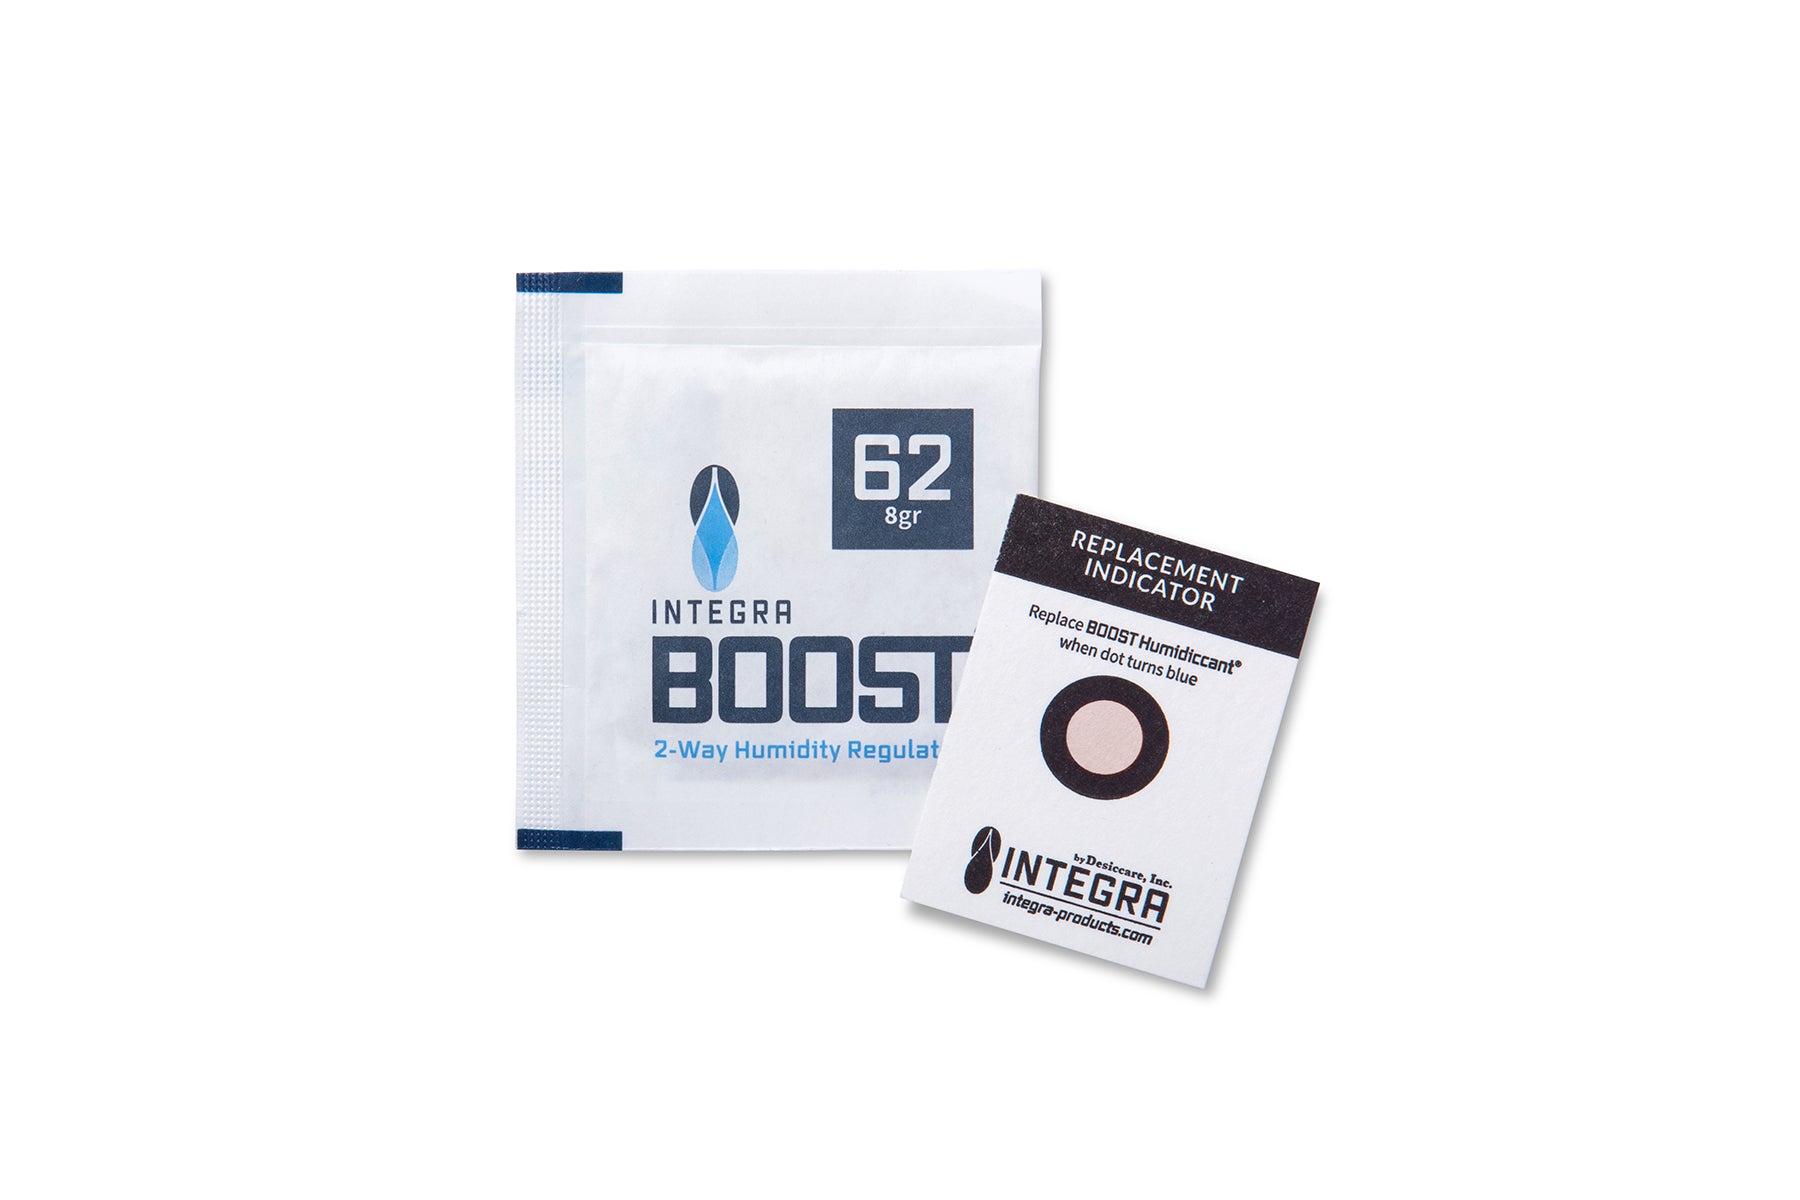 62% Integra Boost Humidity Control Packs - 8 Gram Size - 300 Count